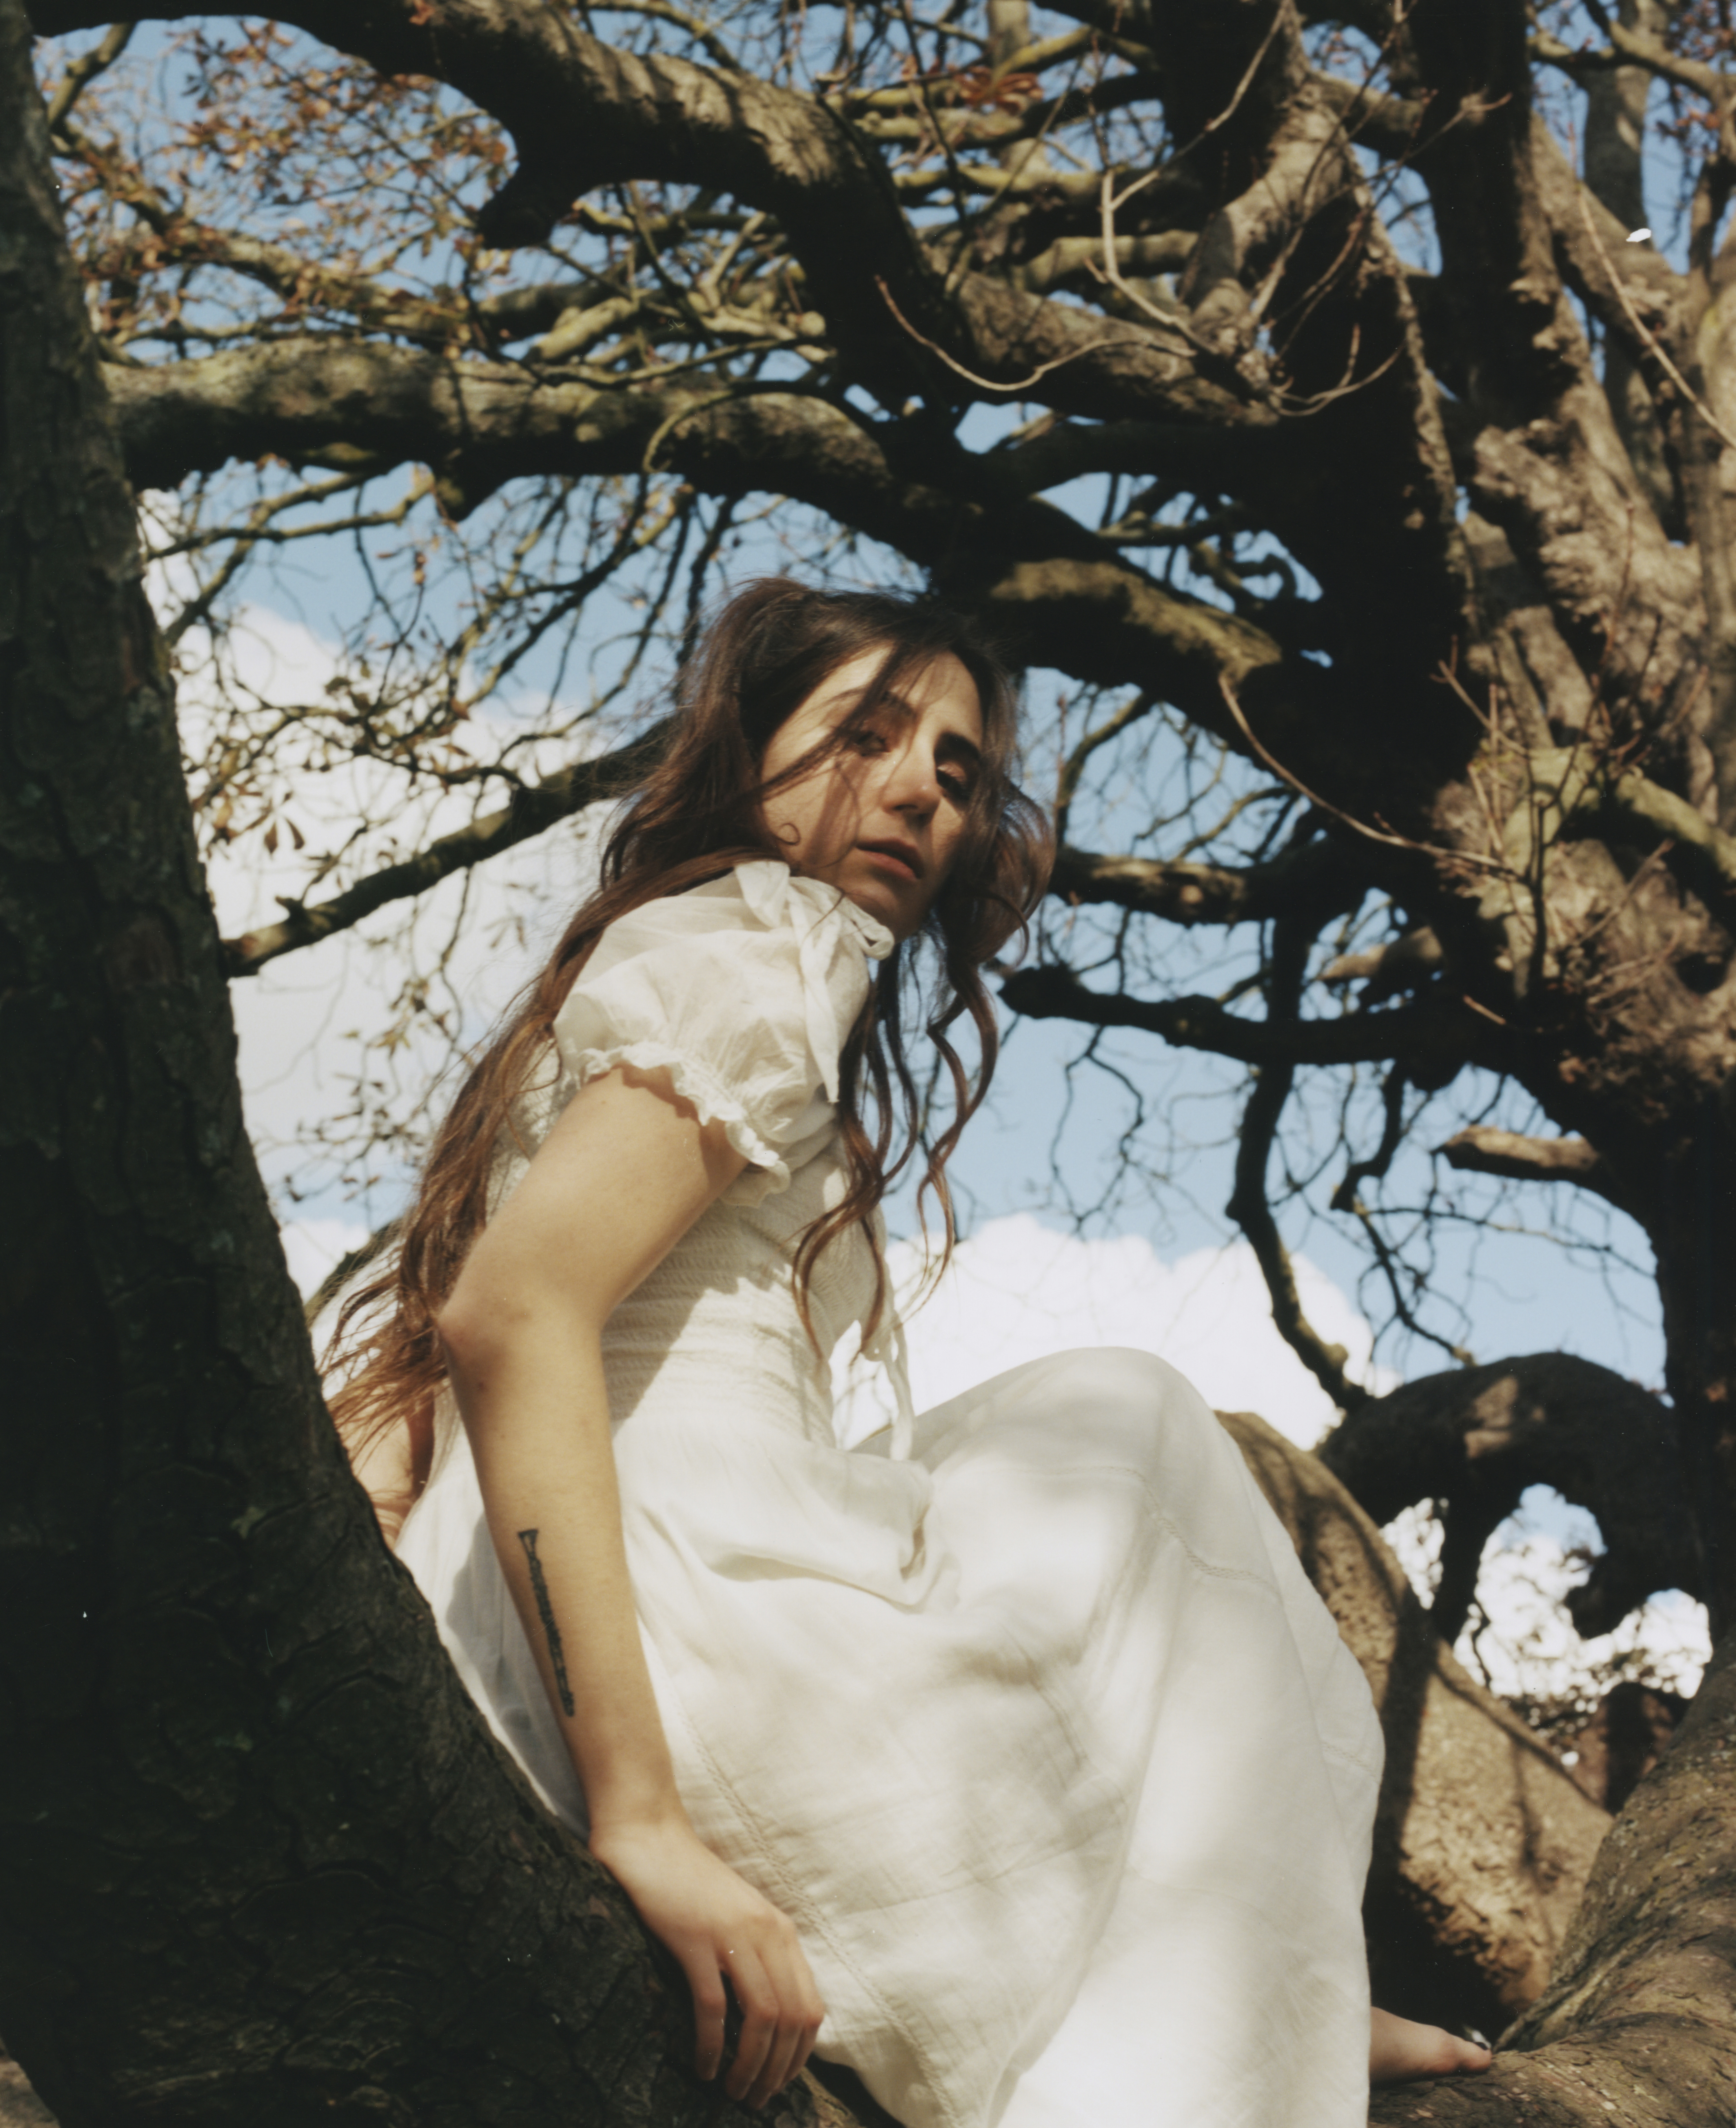 dodie in a white dress, seated in a tree and looking over her shoulder behind her